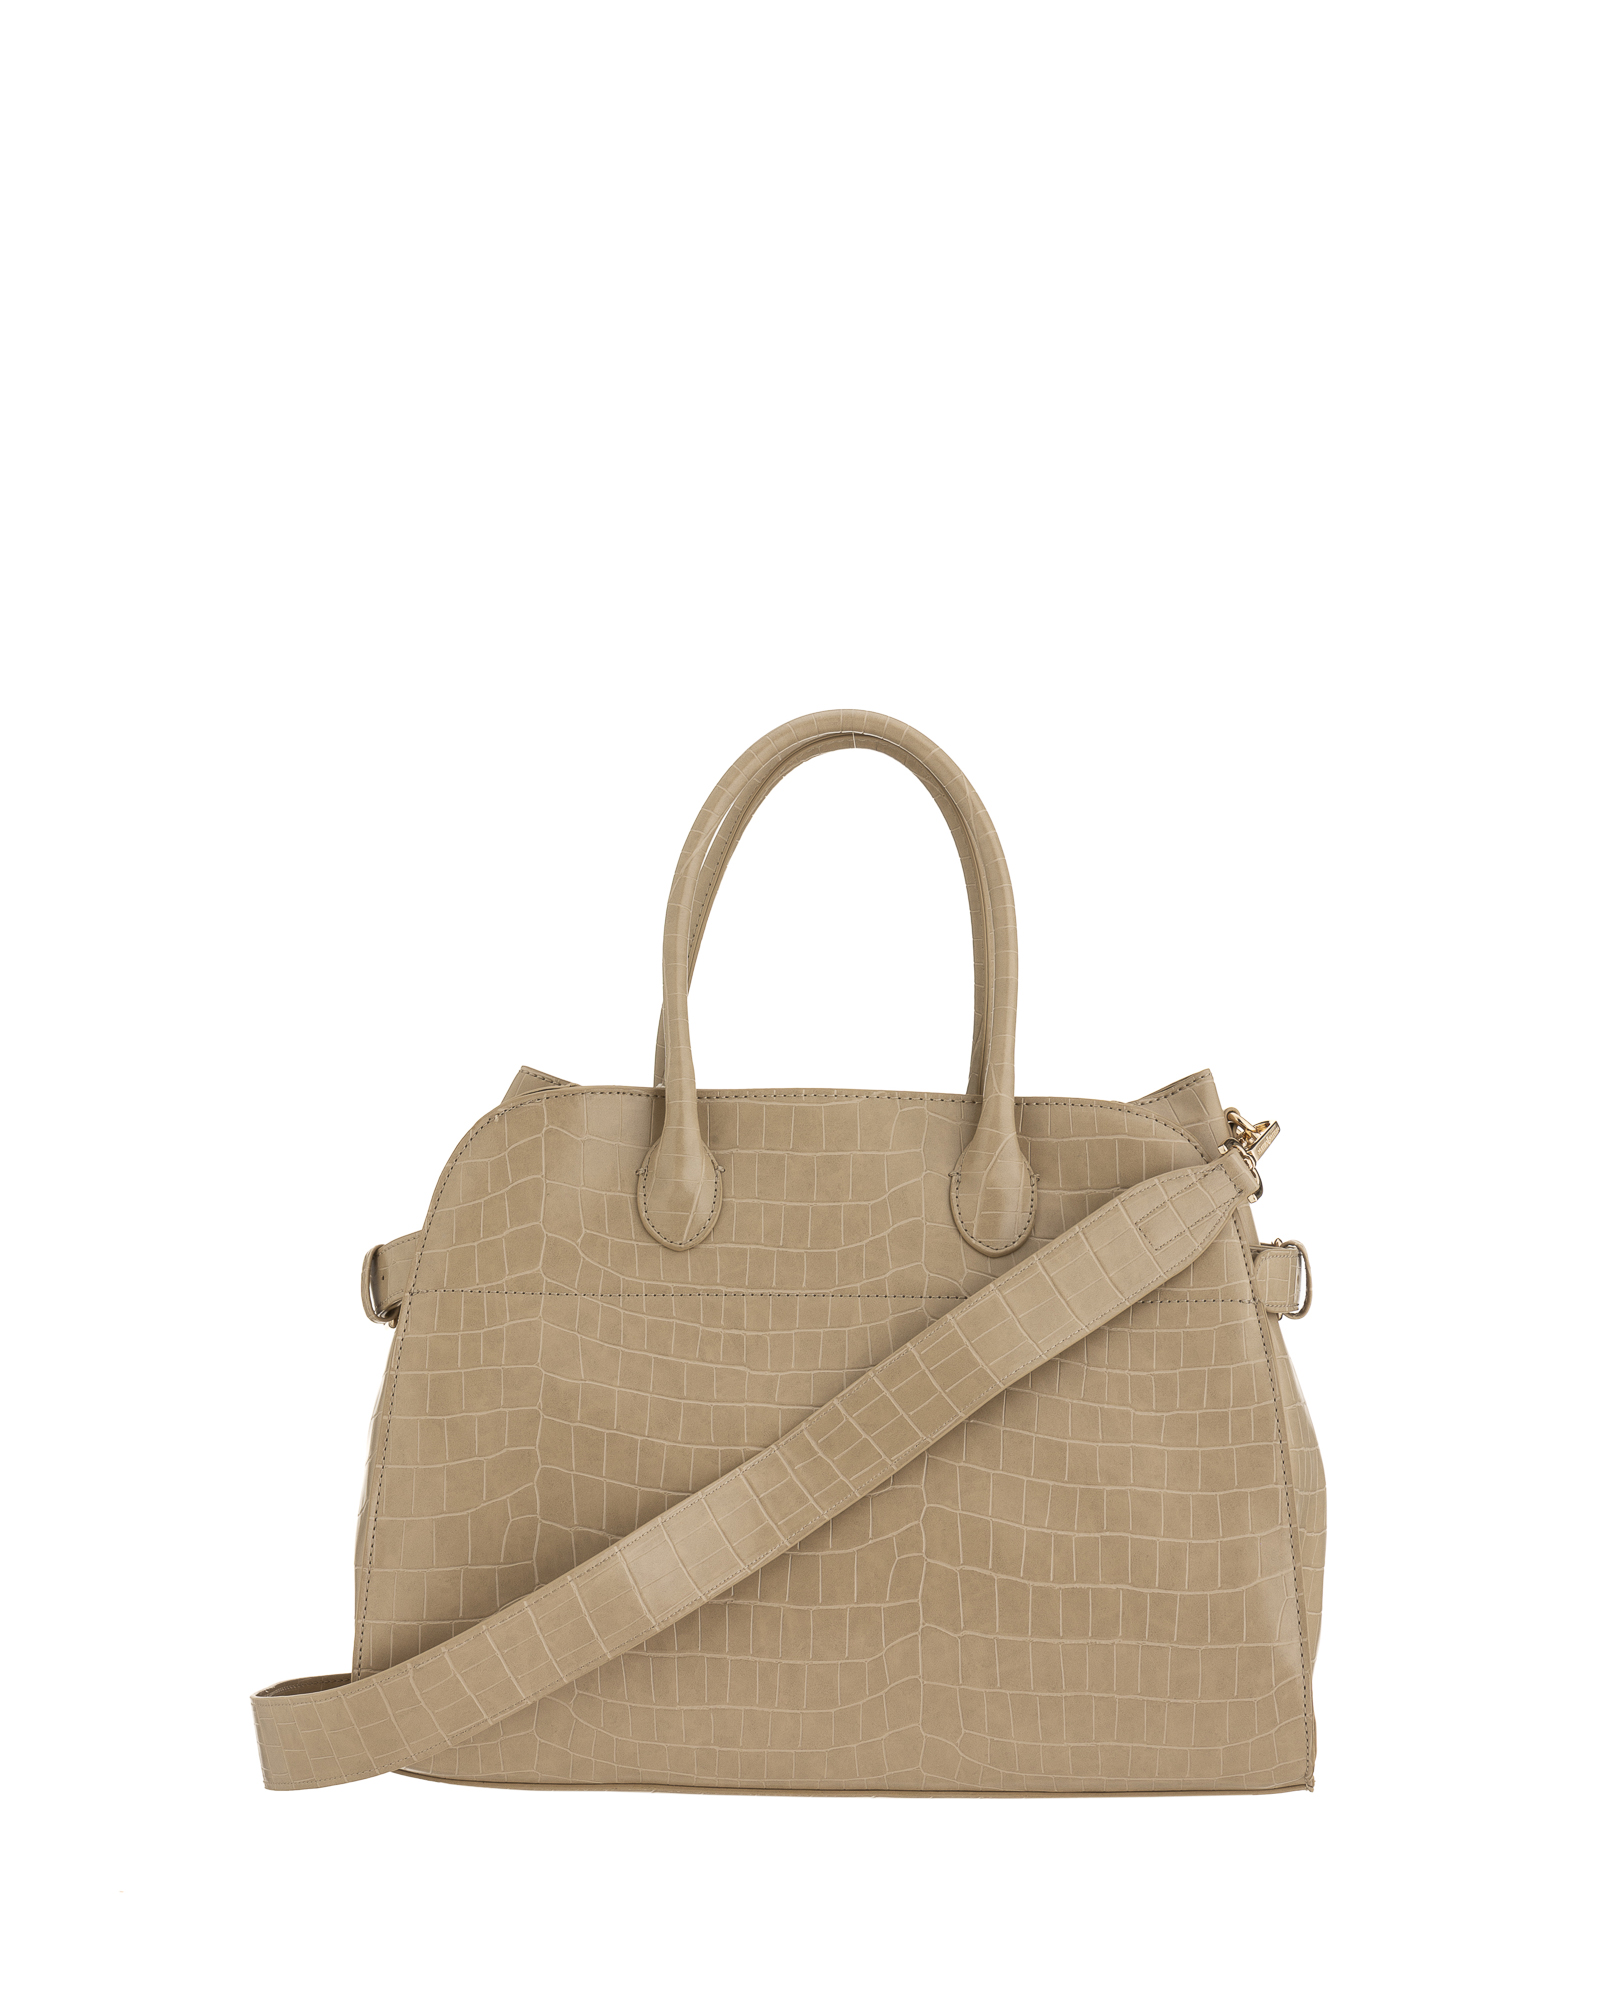 BAG TAUPE - STYLE1302